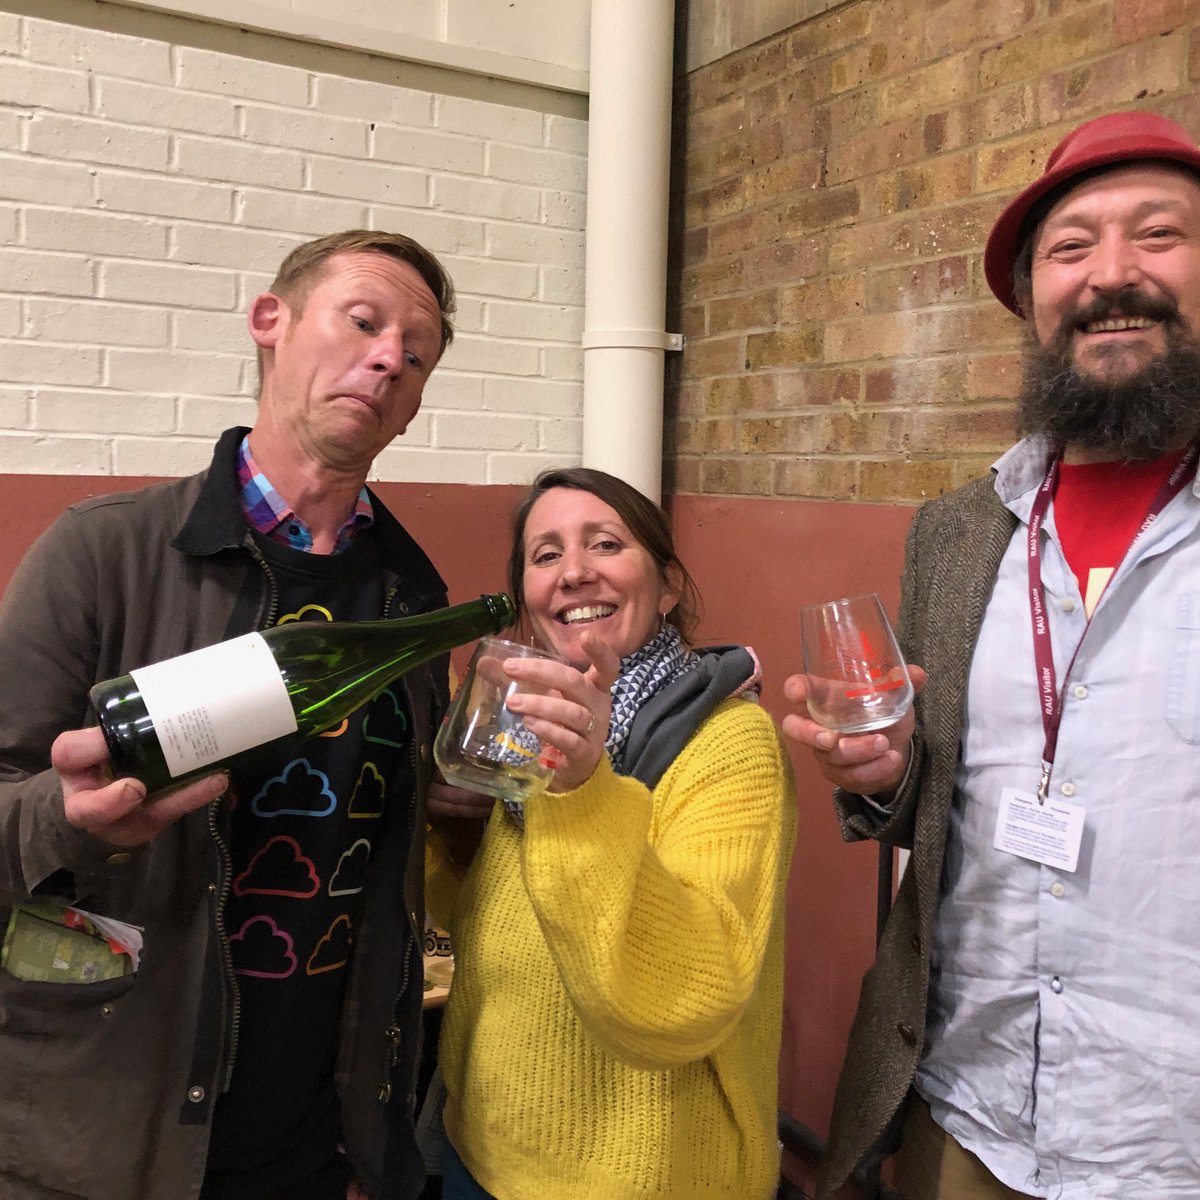 Whose still buzzing from #craftcon23?!
So much fun! And super informative
Looking forward to craftcon24 already
#ciderconference
#britishciderweek
#craftcider
#helpingwiththemondayblues
@TCCPAofficial
@ArtistrawCider